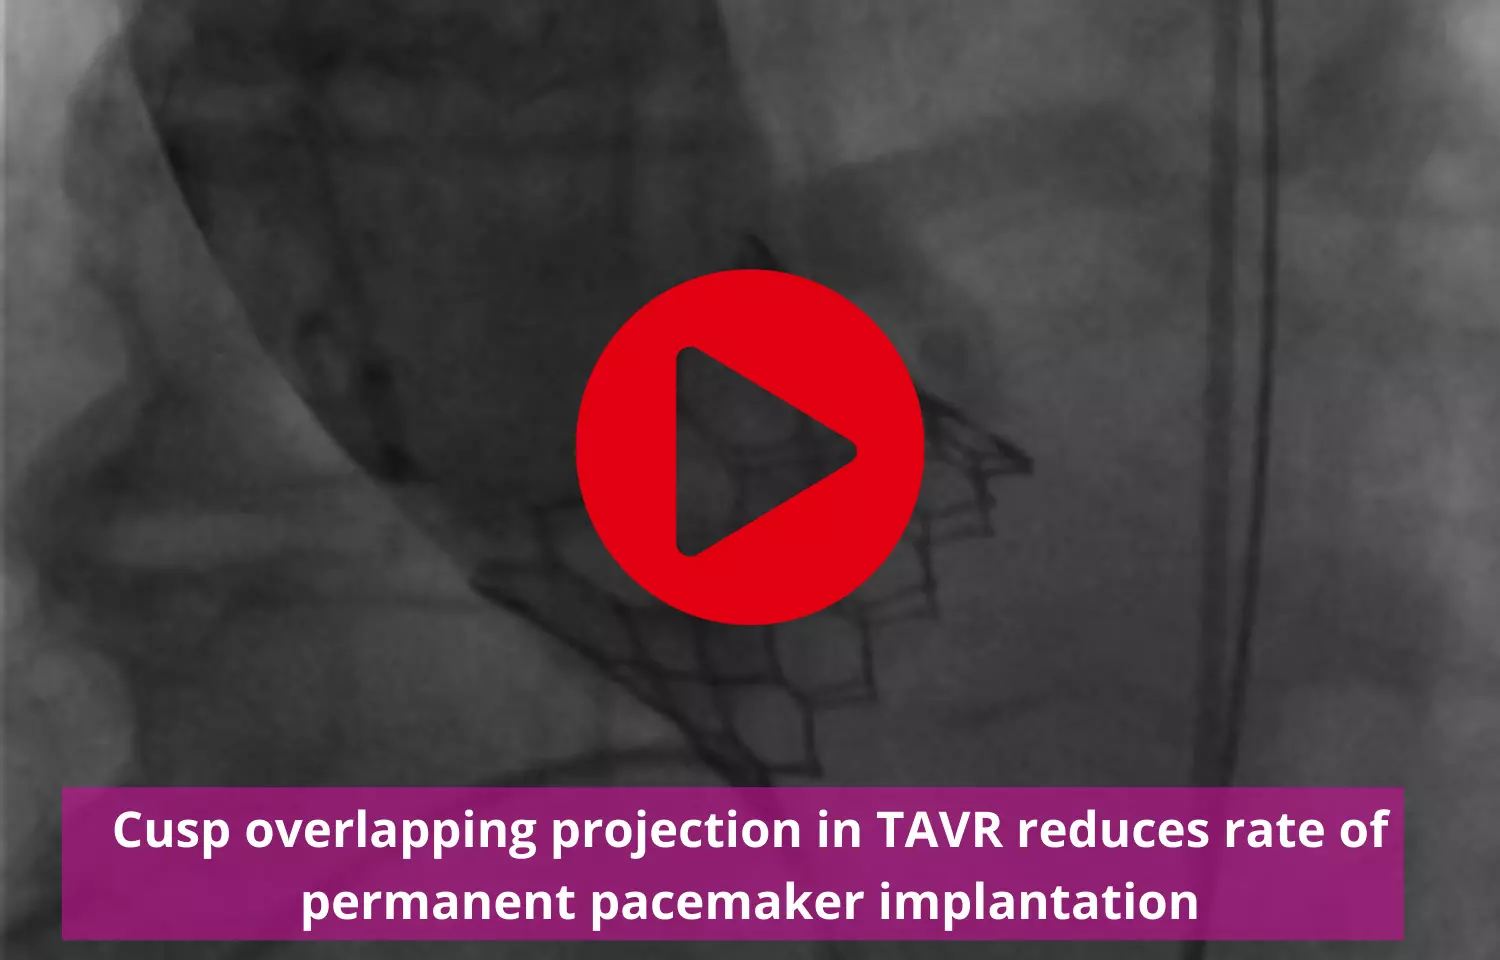 Cusp overlapping in TAVR reduces rate of permanent pacemaker implantation